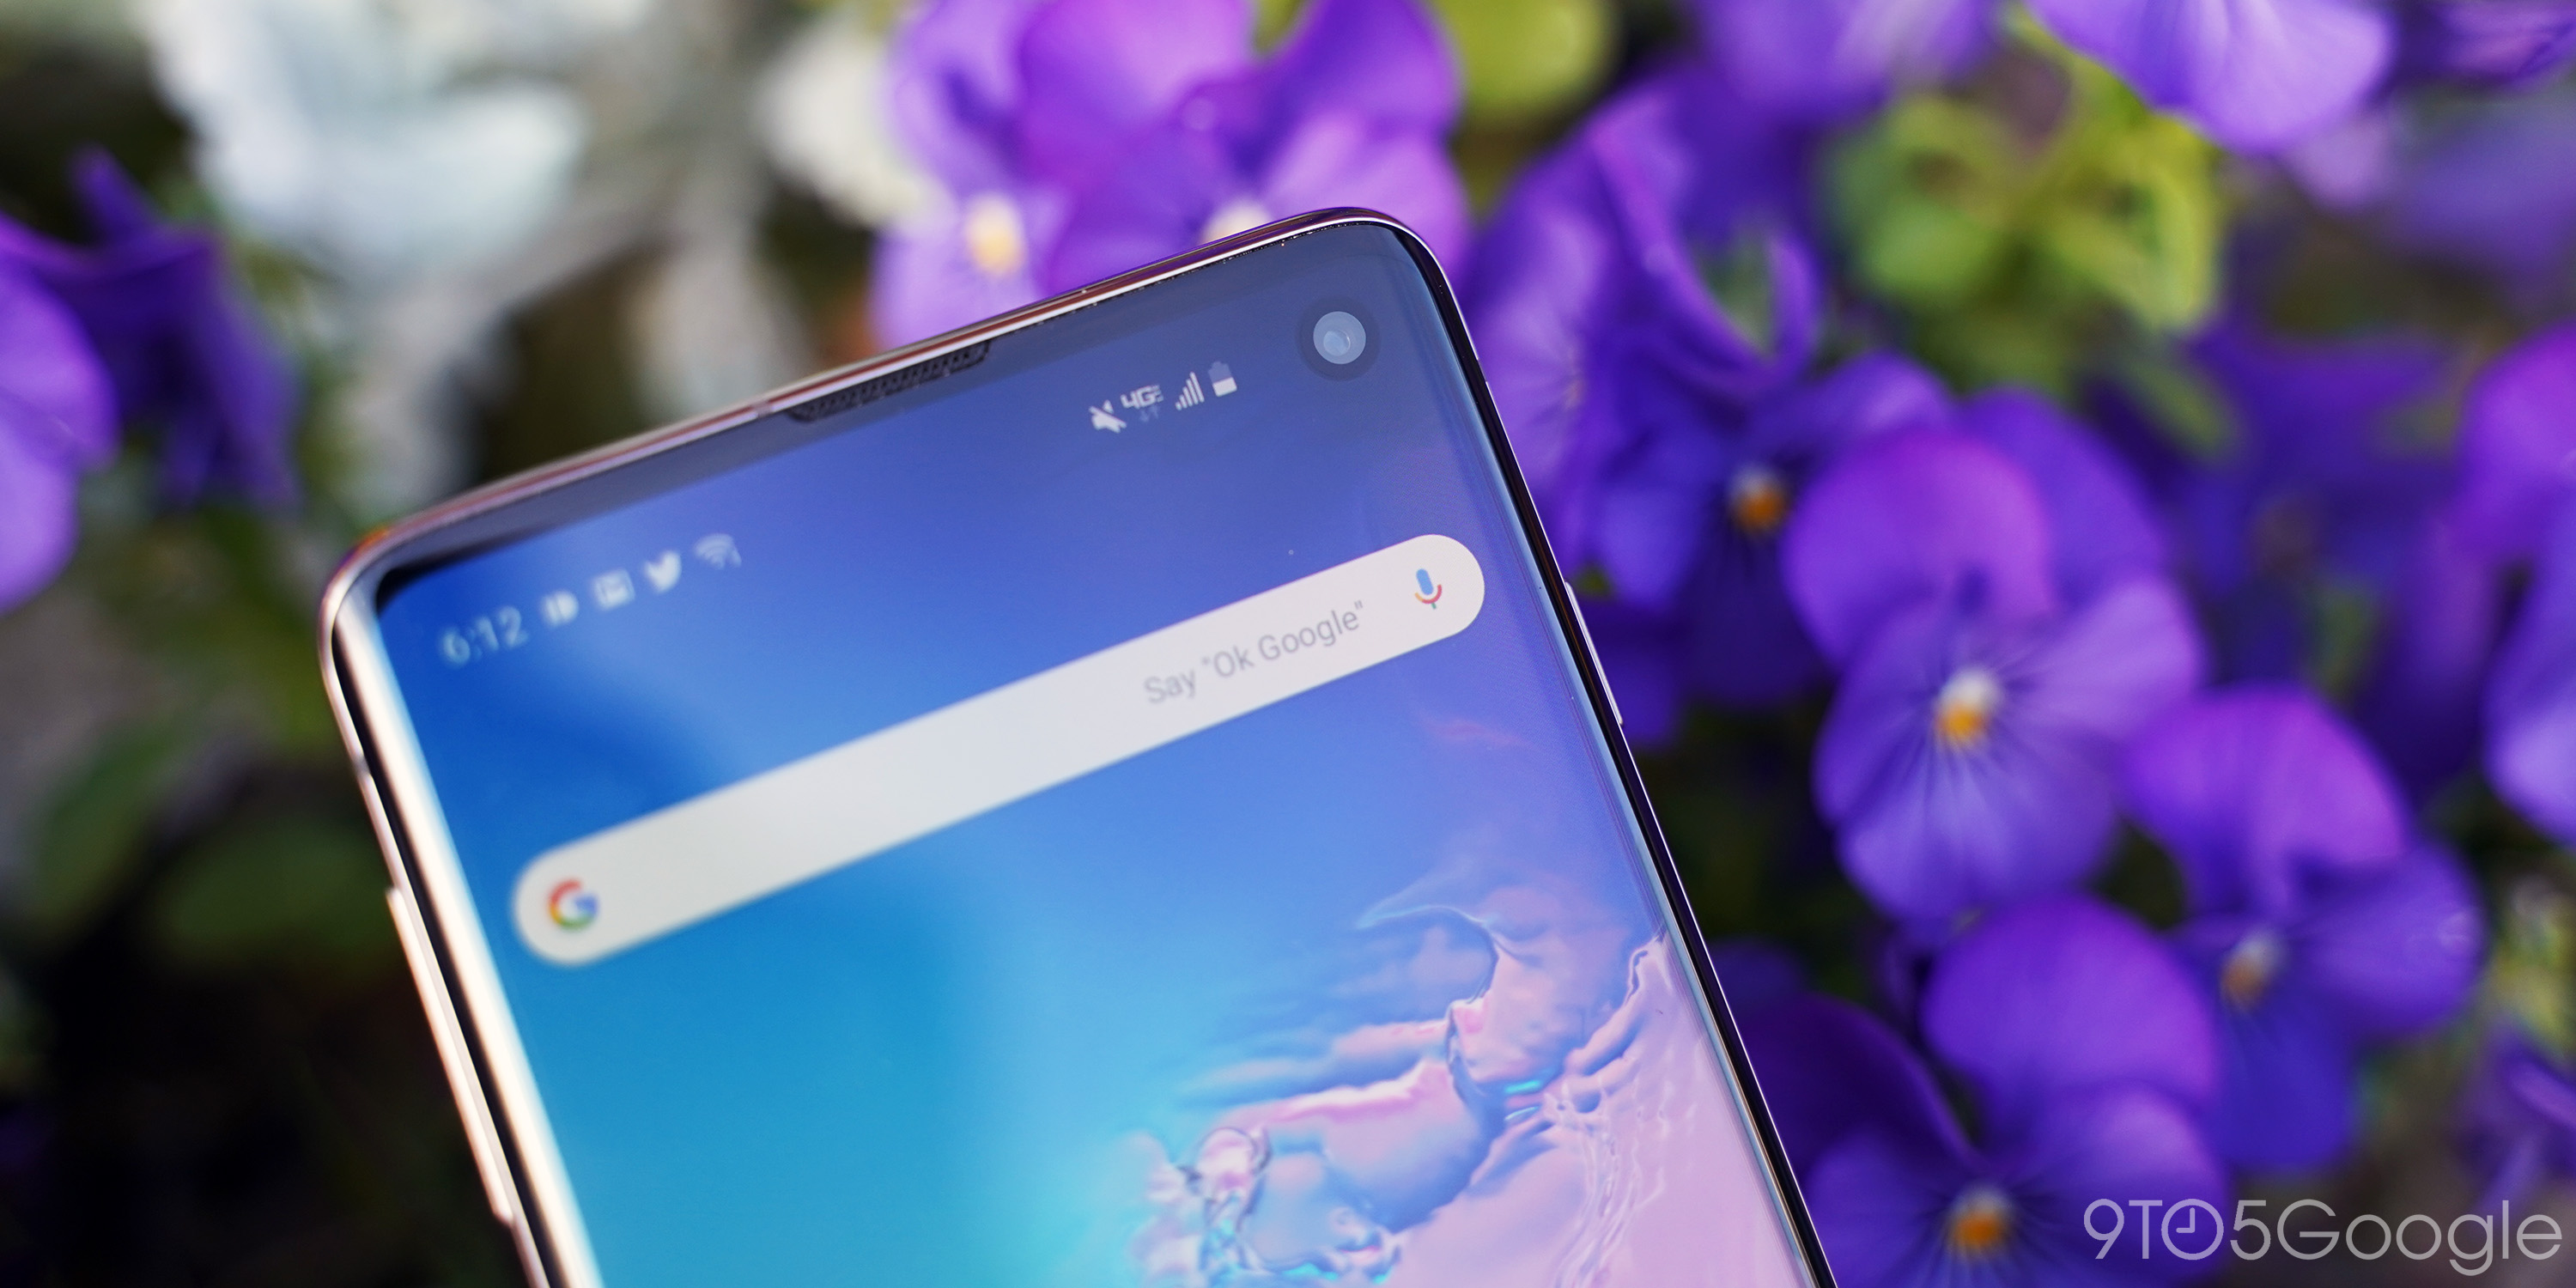 Samsung debuts official Galaxy S10 wallpapers w/ Disney - 9to5Google